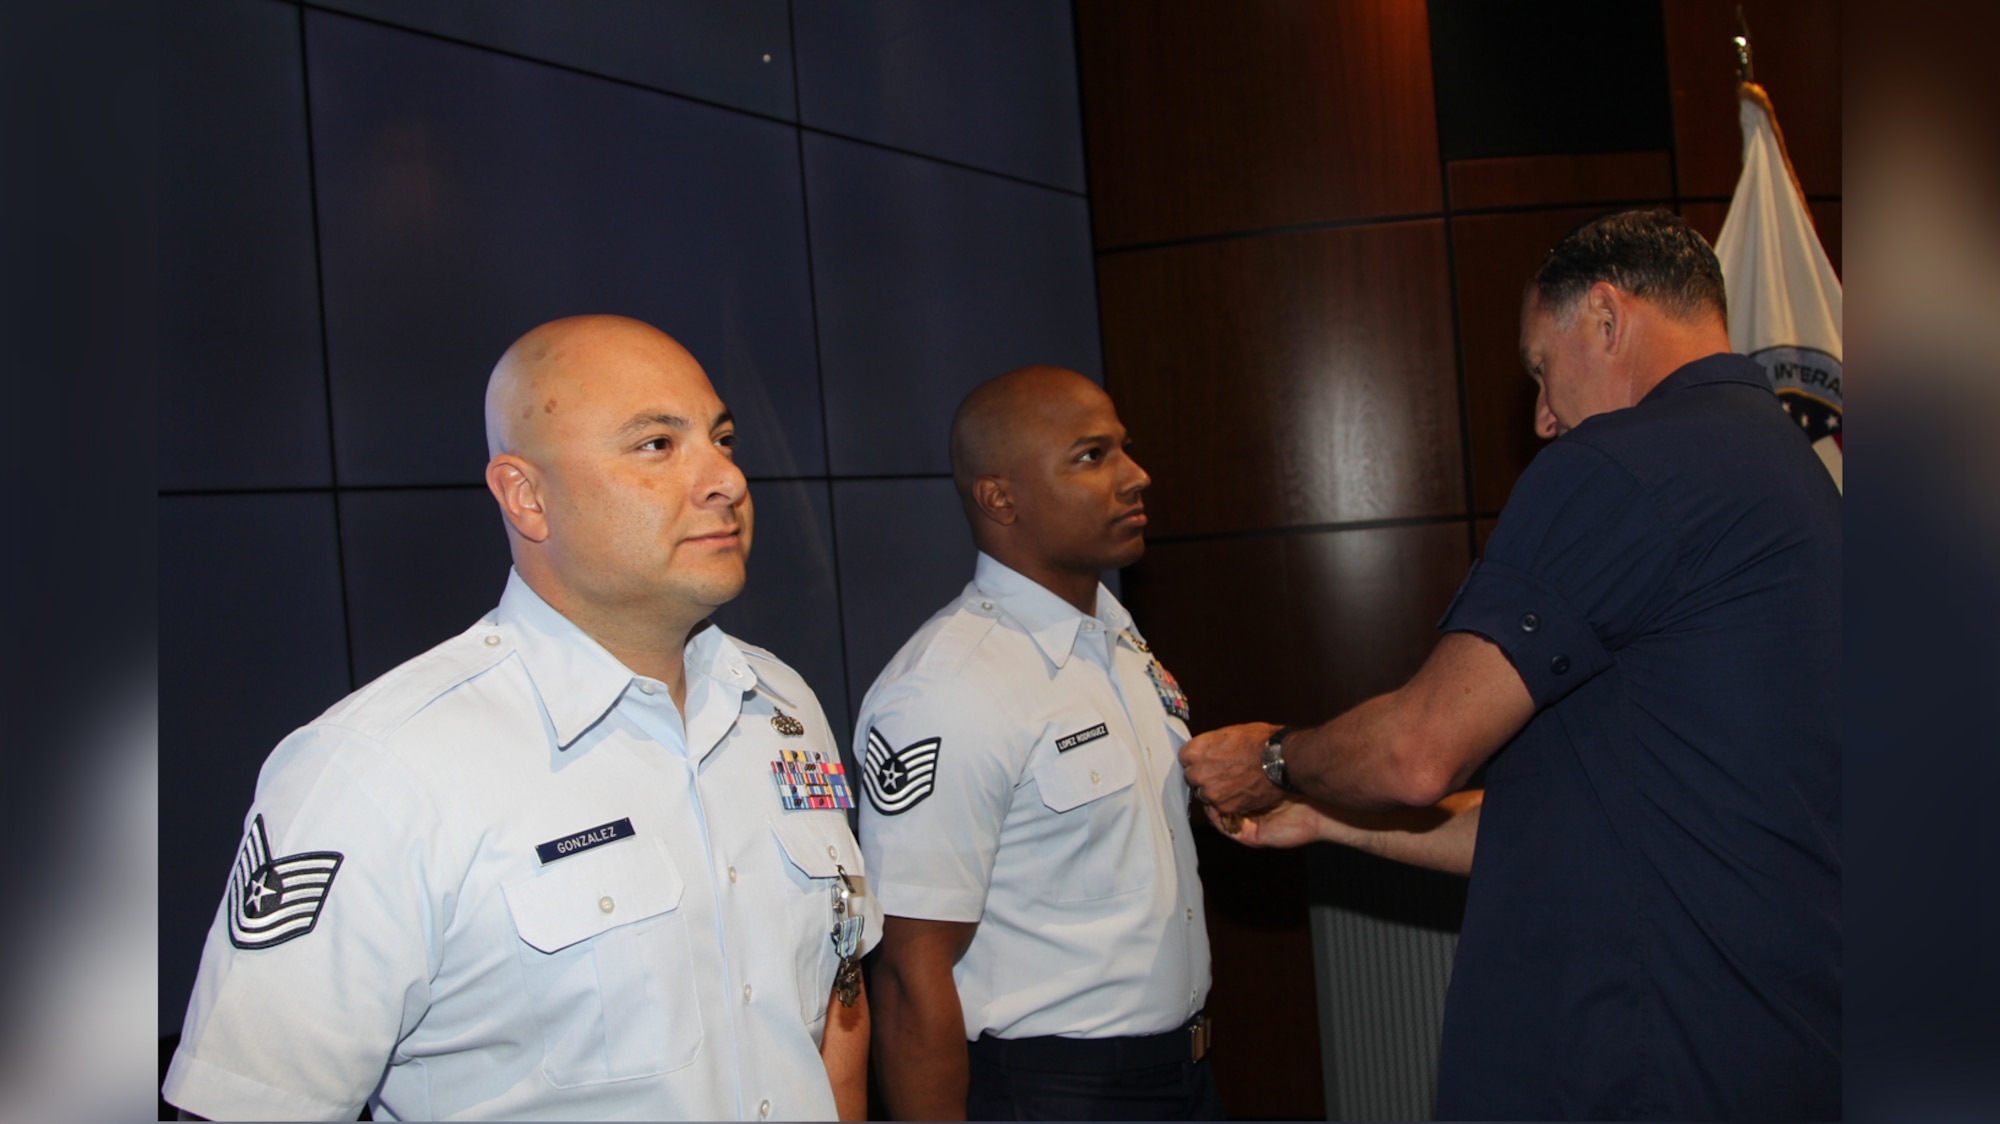 Pictured from left is Tech. Sgt. Edwin Lenis Gonzalez and Tech. Sgt. Jose Lopez Rodriguez received the Joint Service Achievement Medal from Coast Guard Rear Adm. Pat DeQuattro. (Courtesy photo)